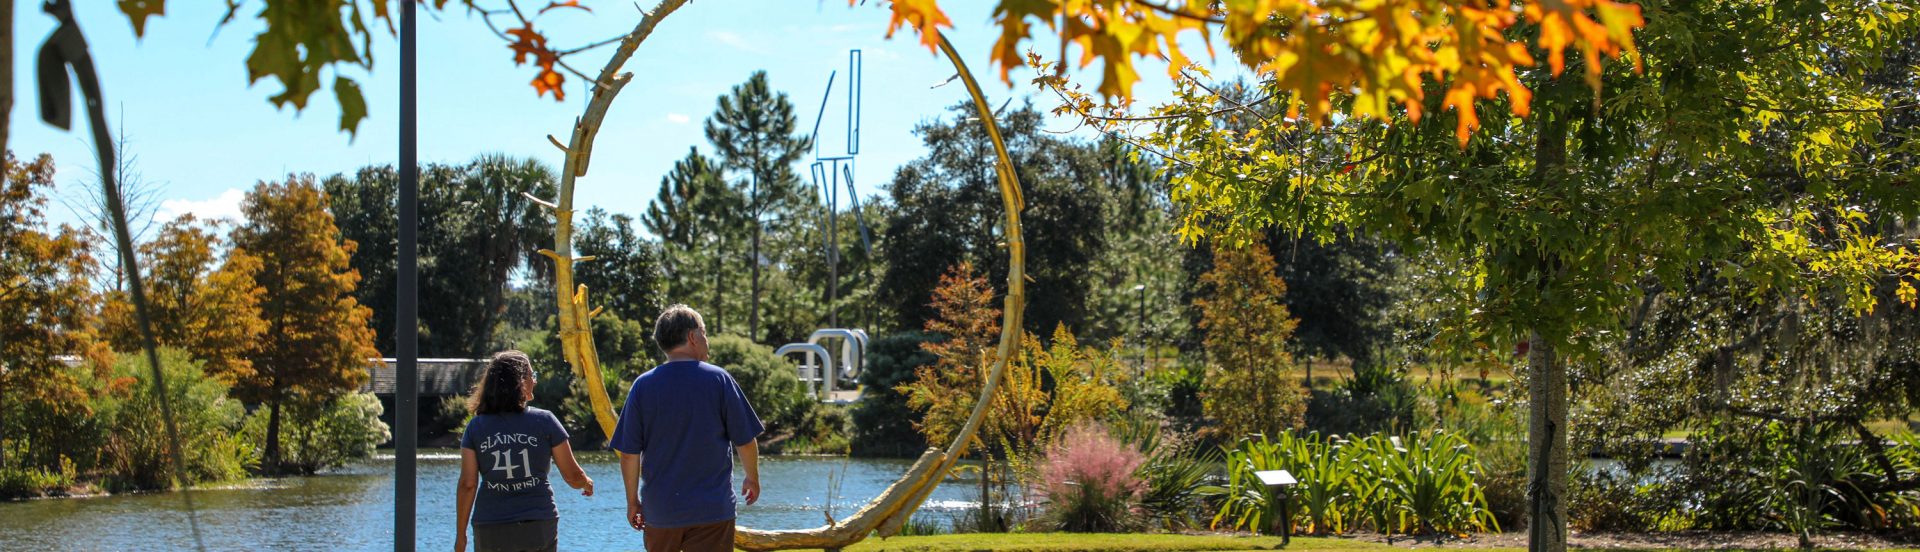 NOMA announces a year-long celebration of the 20th anniversary of the Sydney and Walda Besthoff Sculpture Garden.
